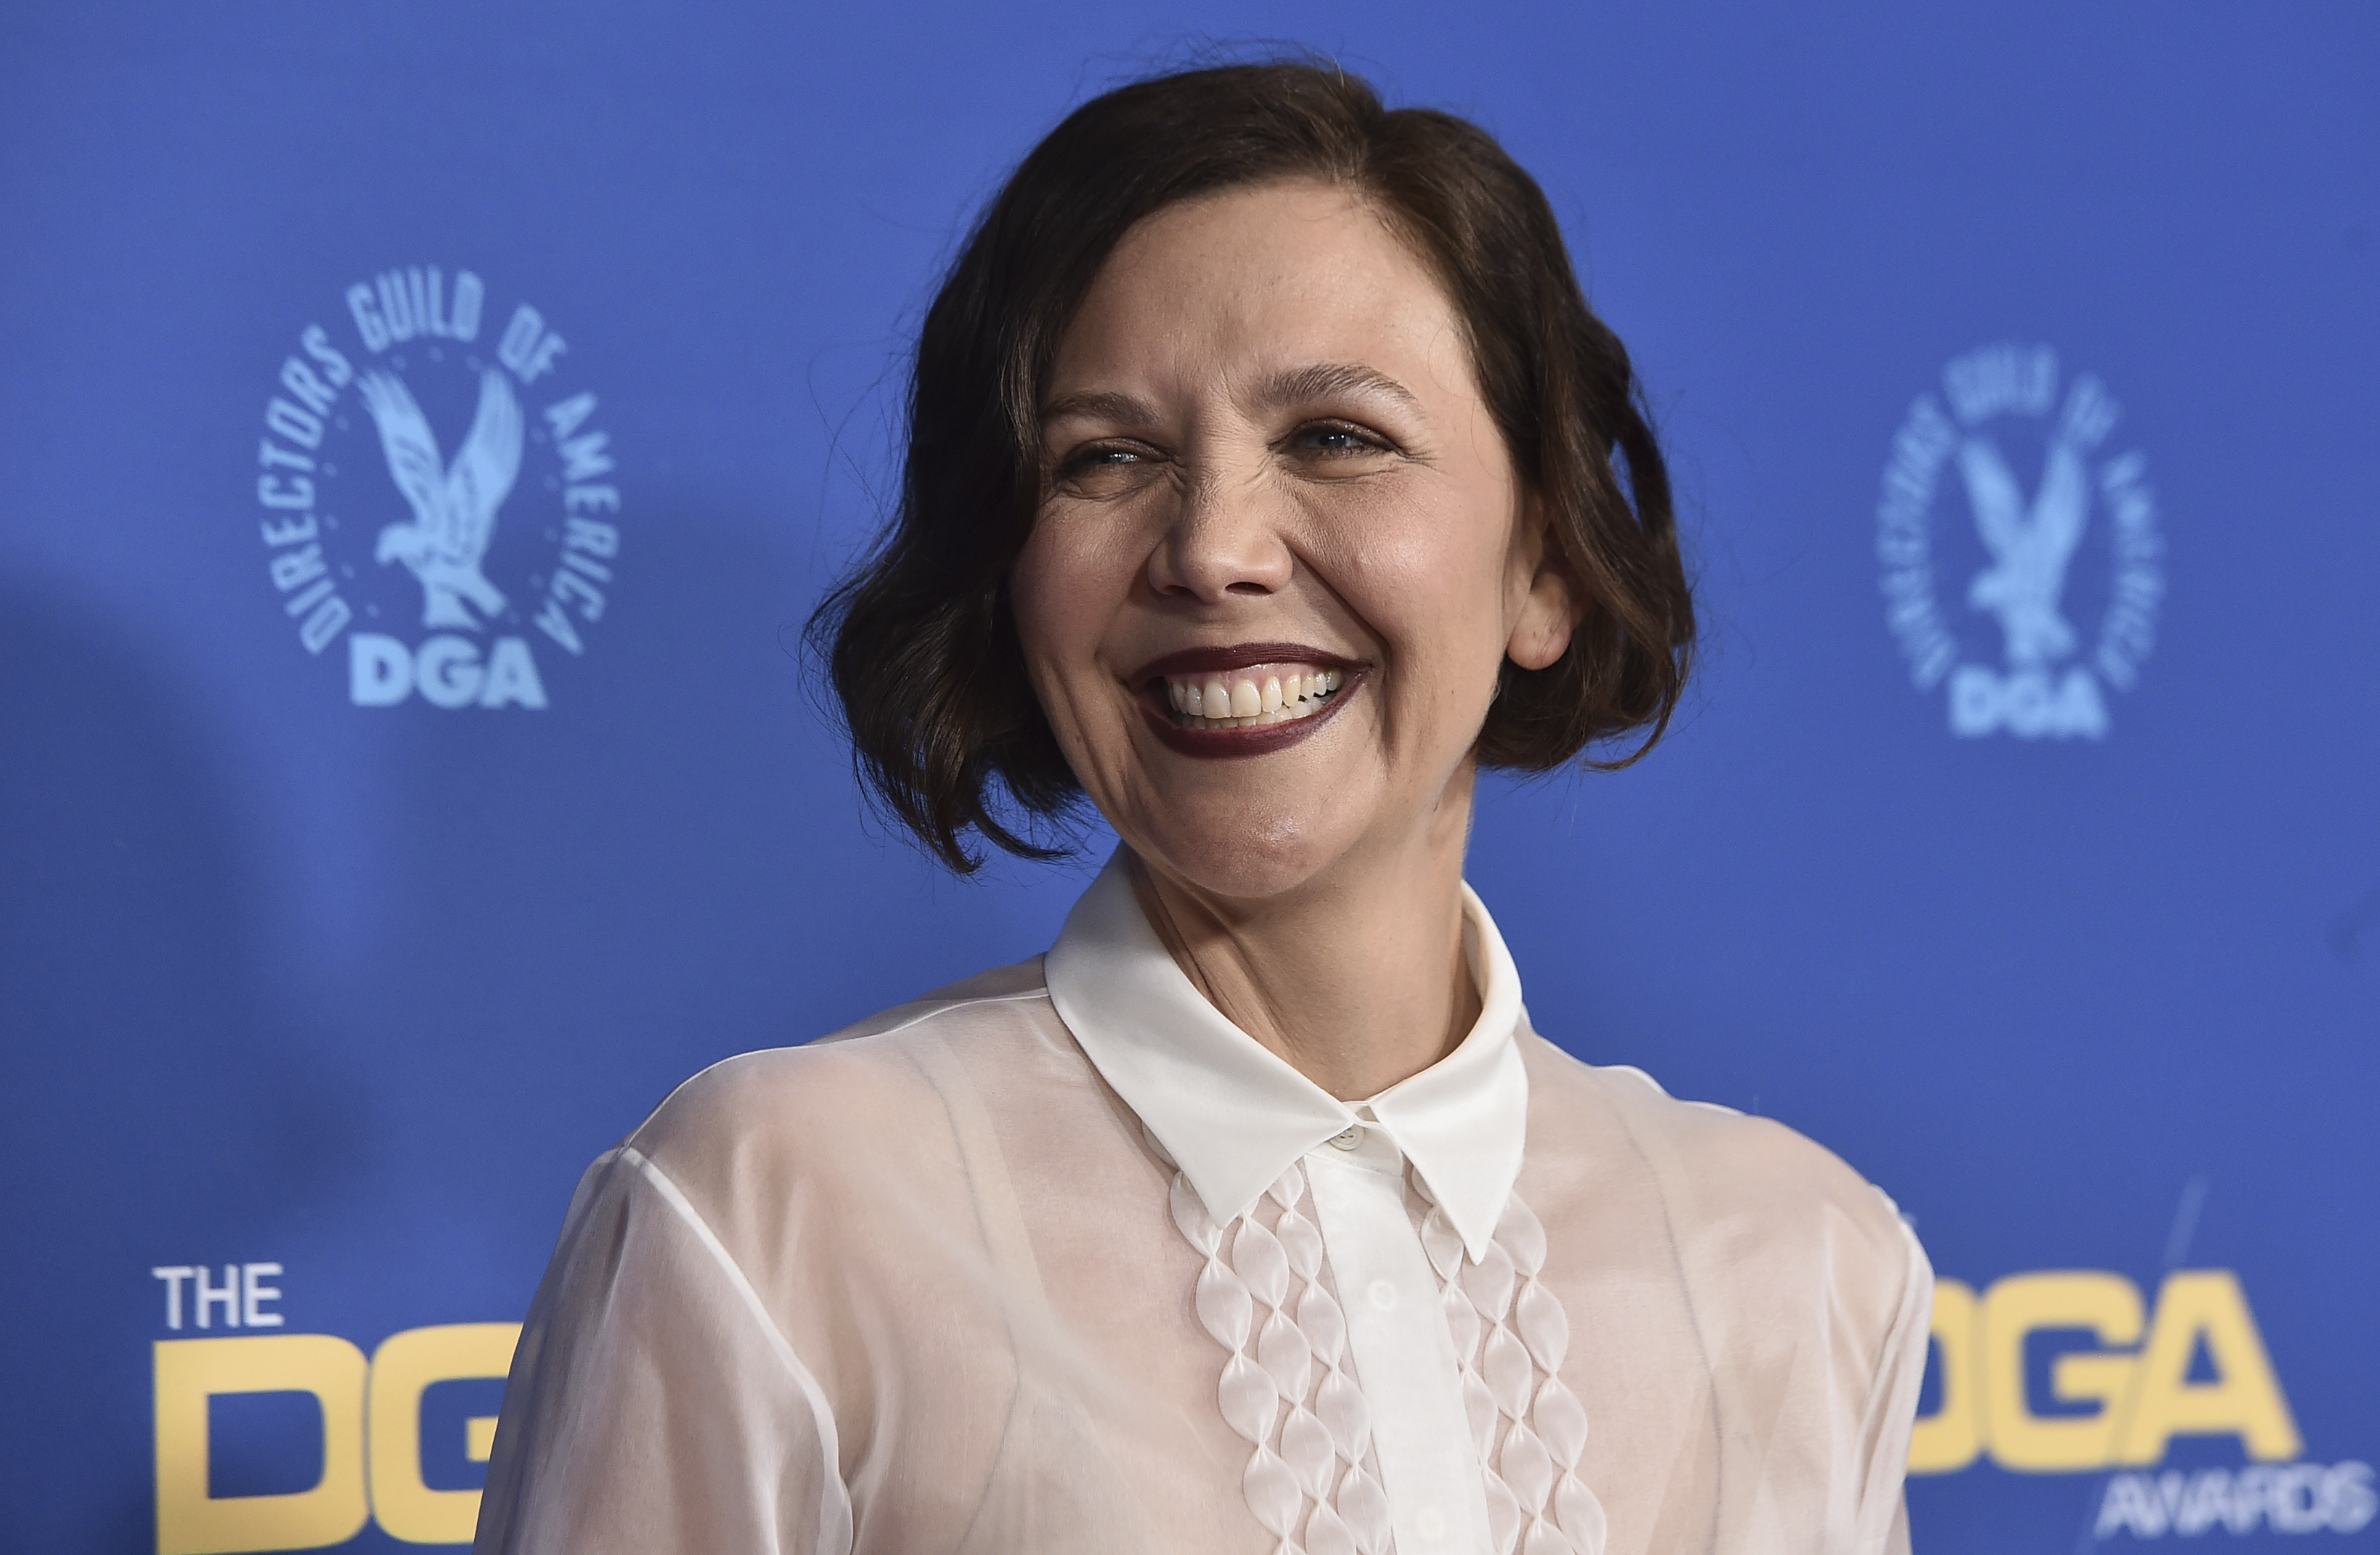 Maggie Gyllenhaal arrives at the 74th annual Directors Guild of America Awards, Saturday, March 12, 2022, at The Beverly Hilton in Beverly Hills, Calif. (Photo by Jordan Strauss/Invision/AP)